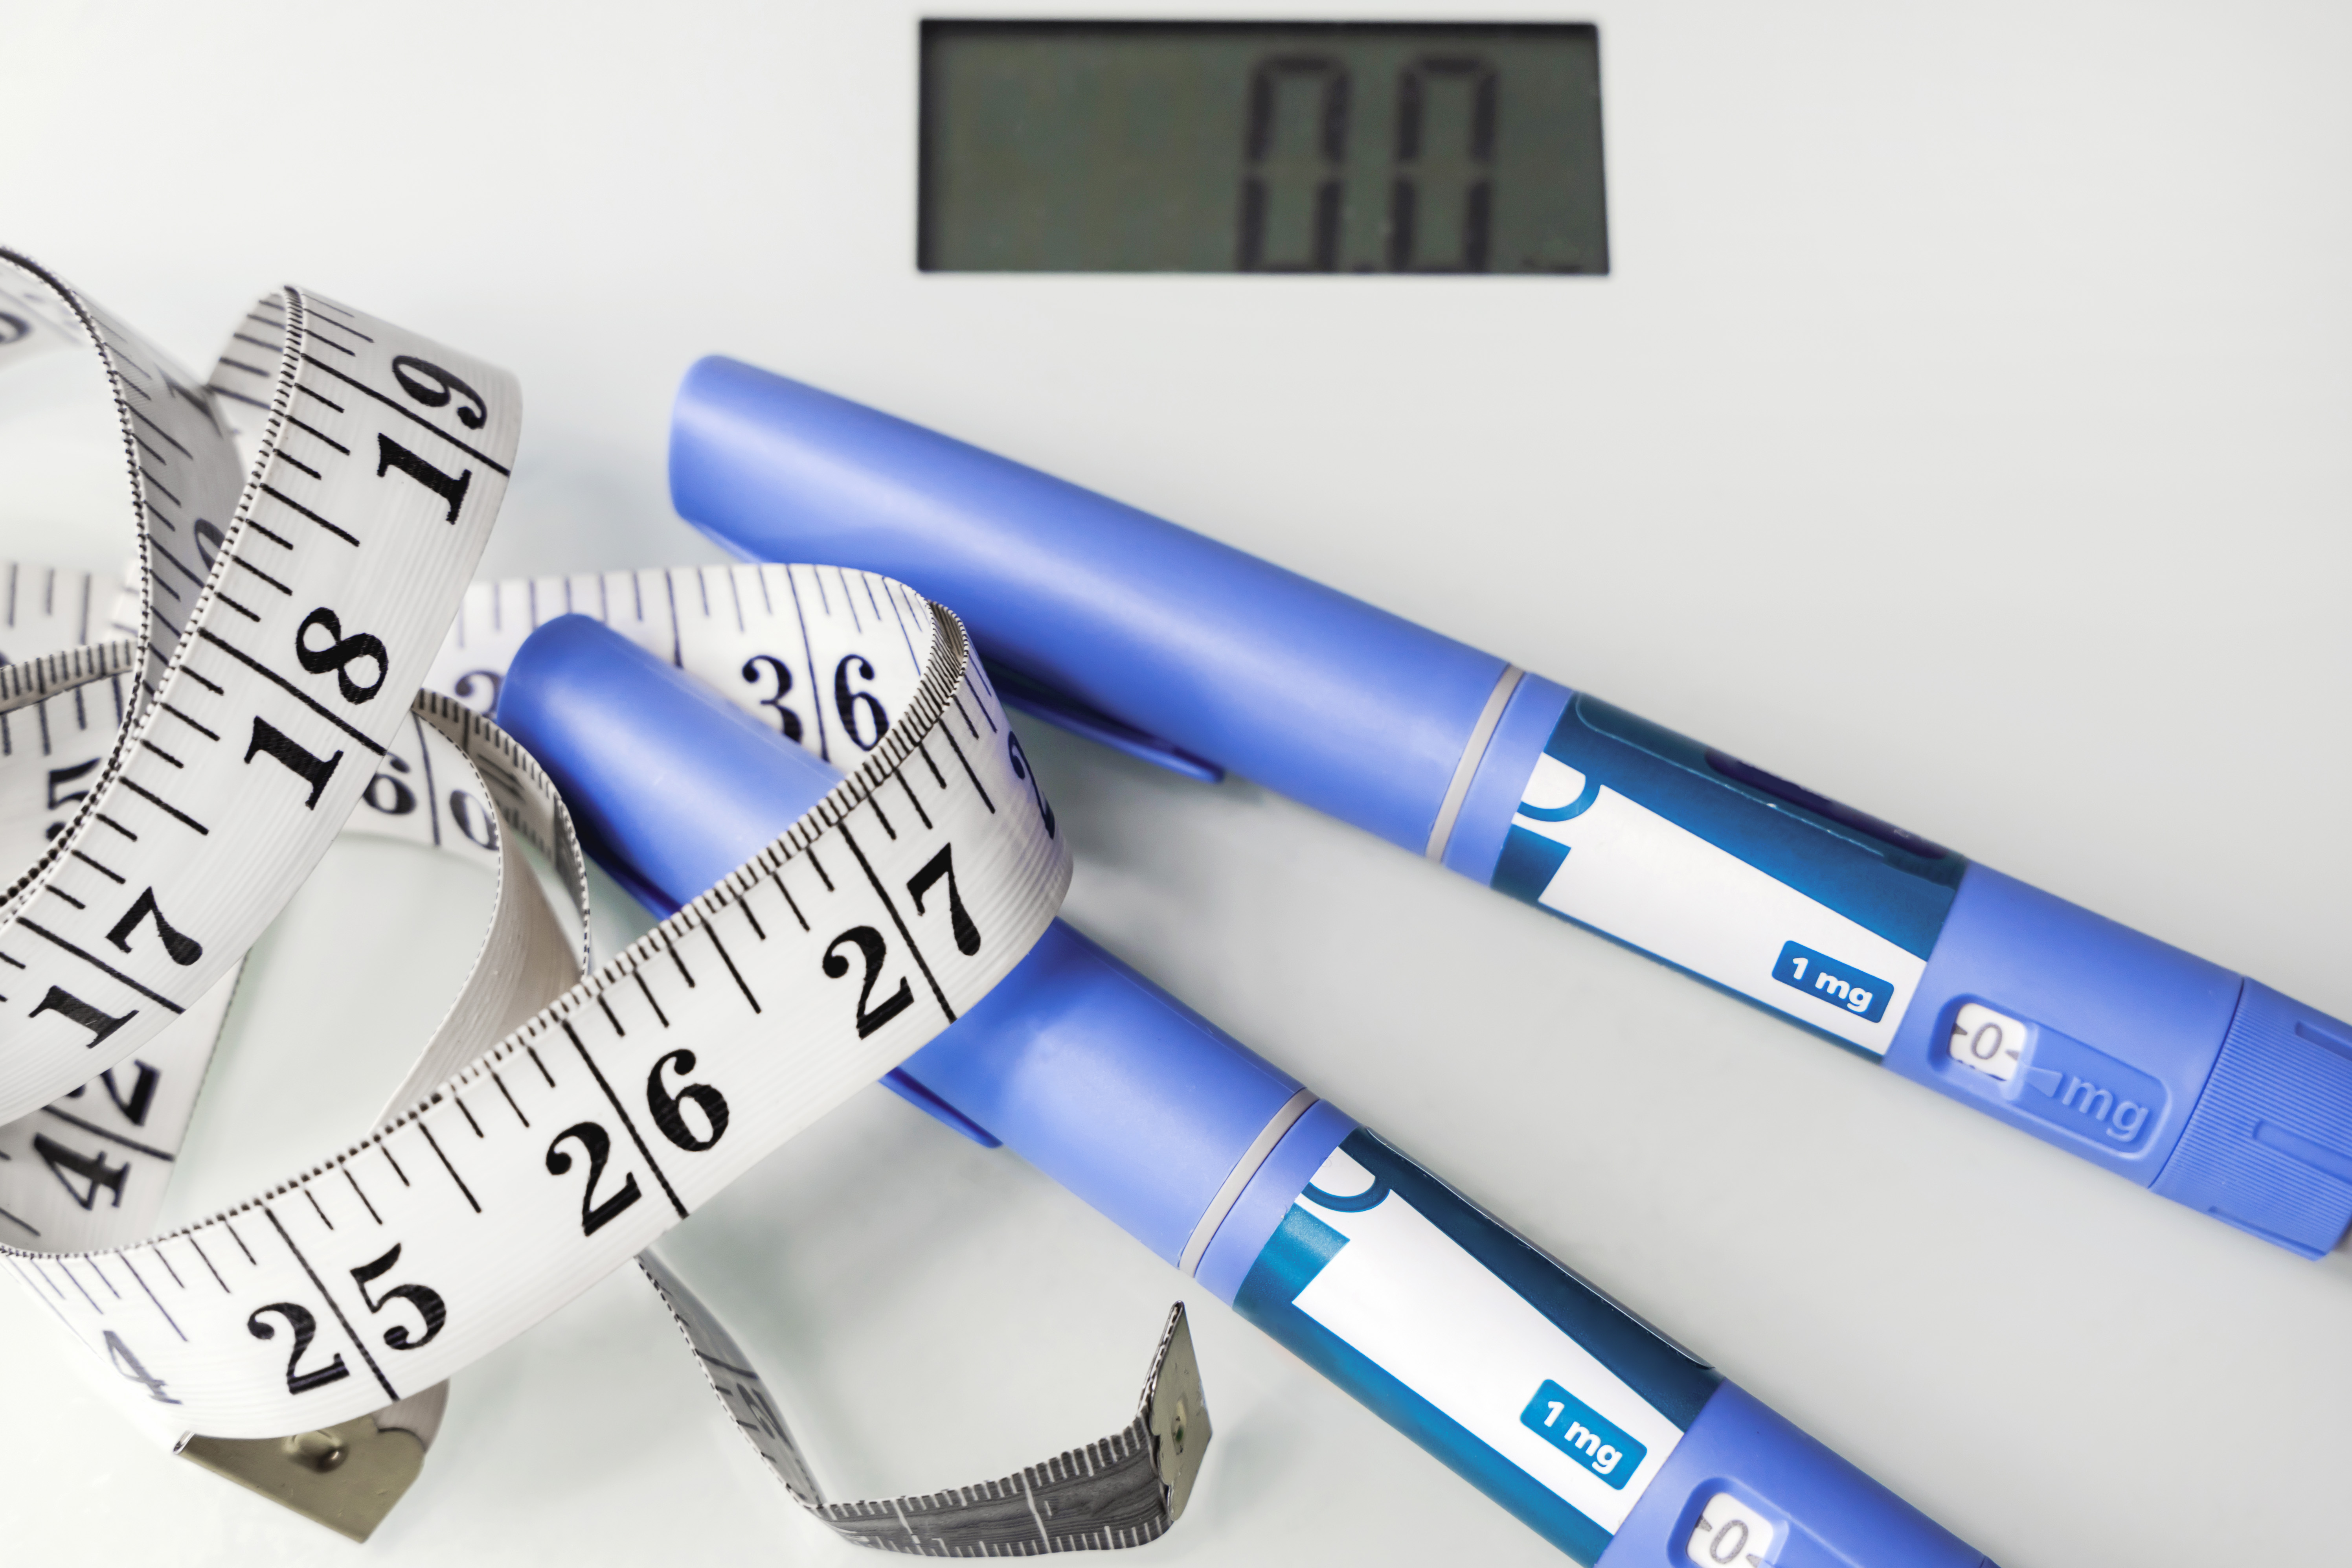 photo of scale, measuring tape and weight loss drugs to combat obesity